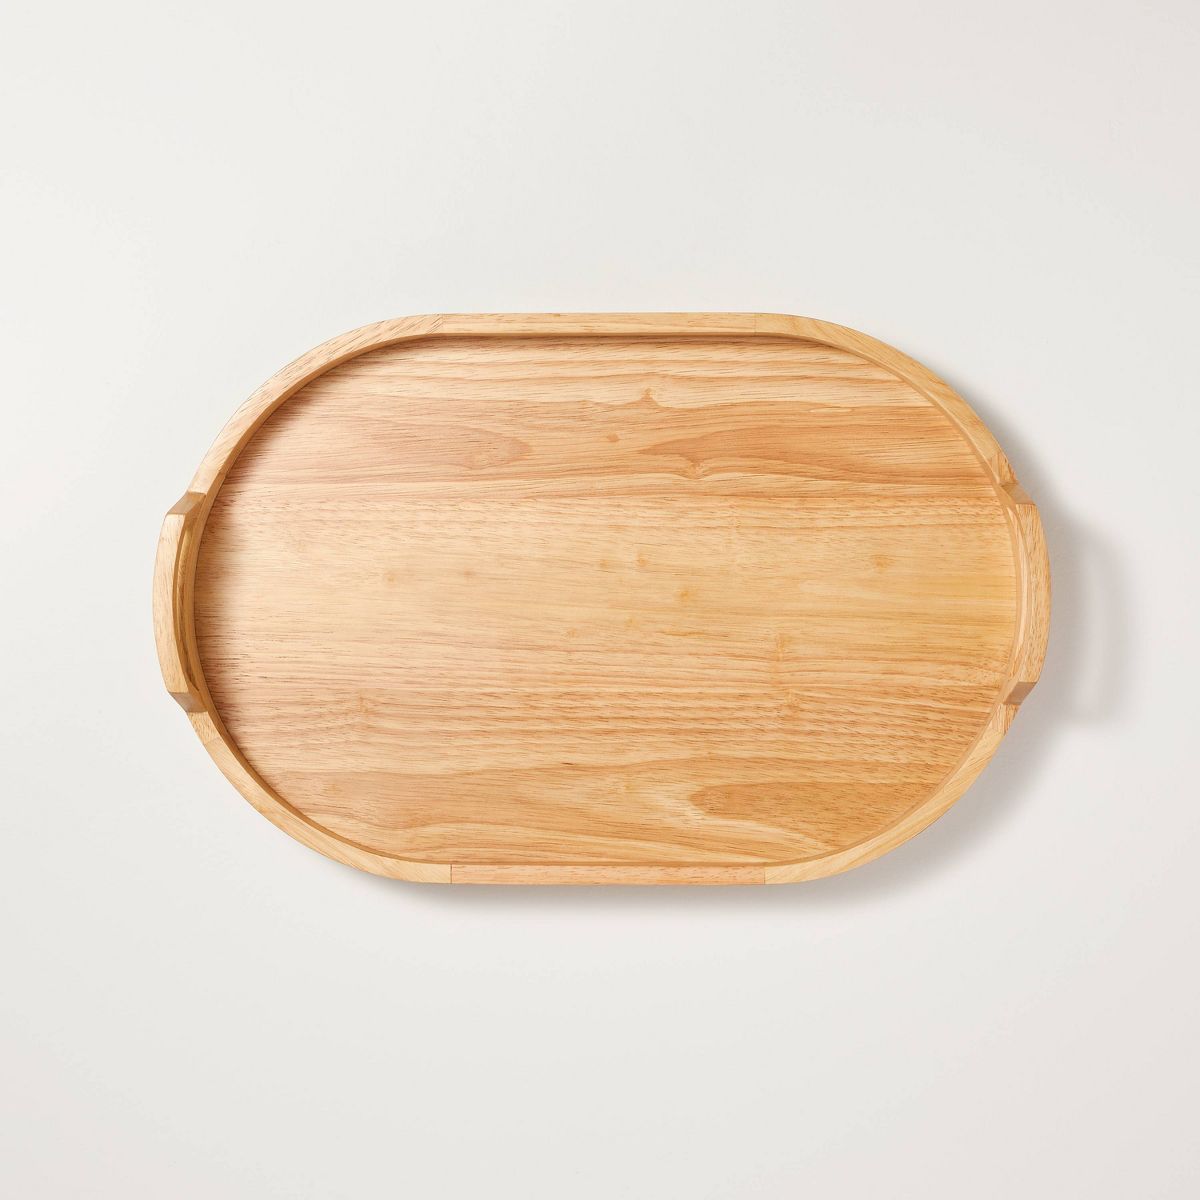 20"x13" Decorative Oval Wood Tray Natural - Hearth & Hand™ with Magnolia | Target